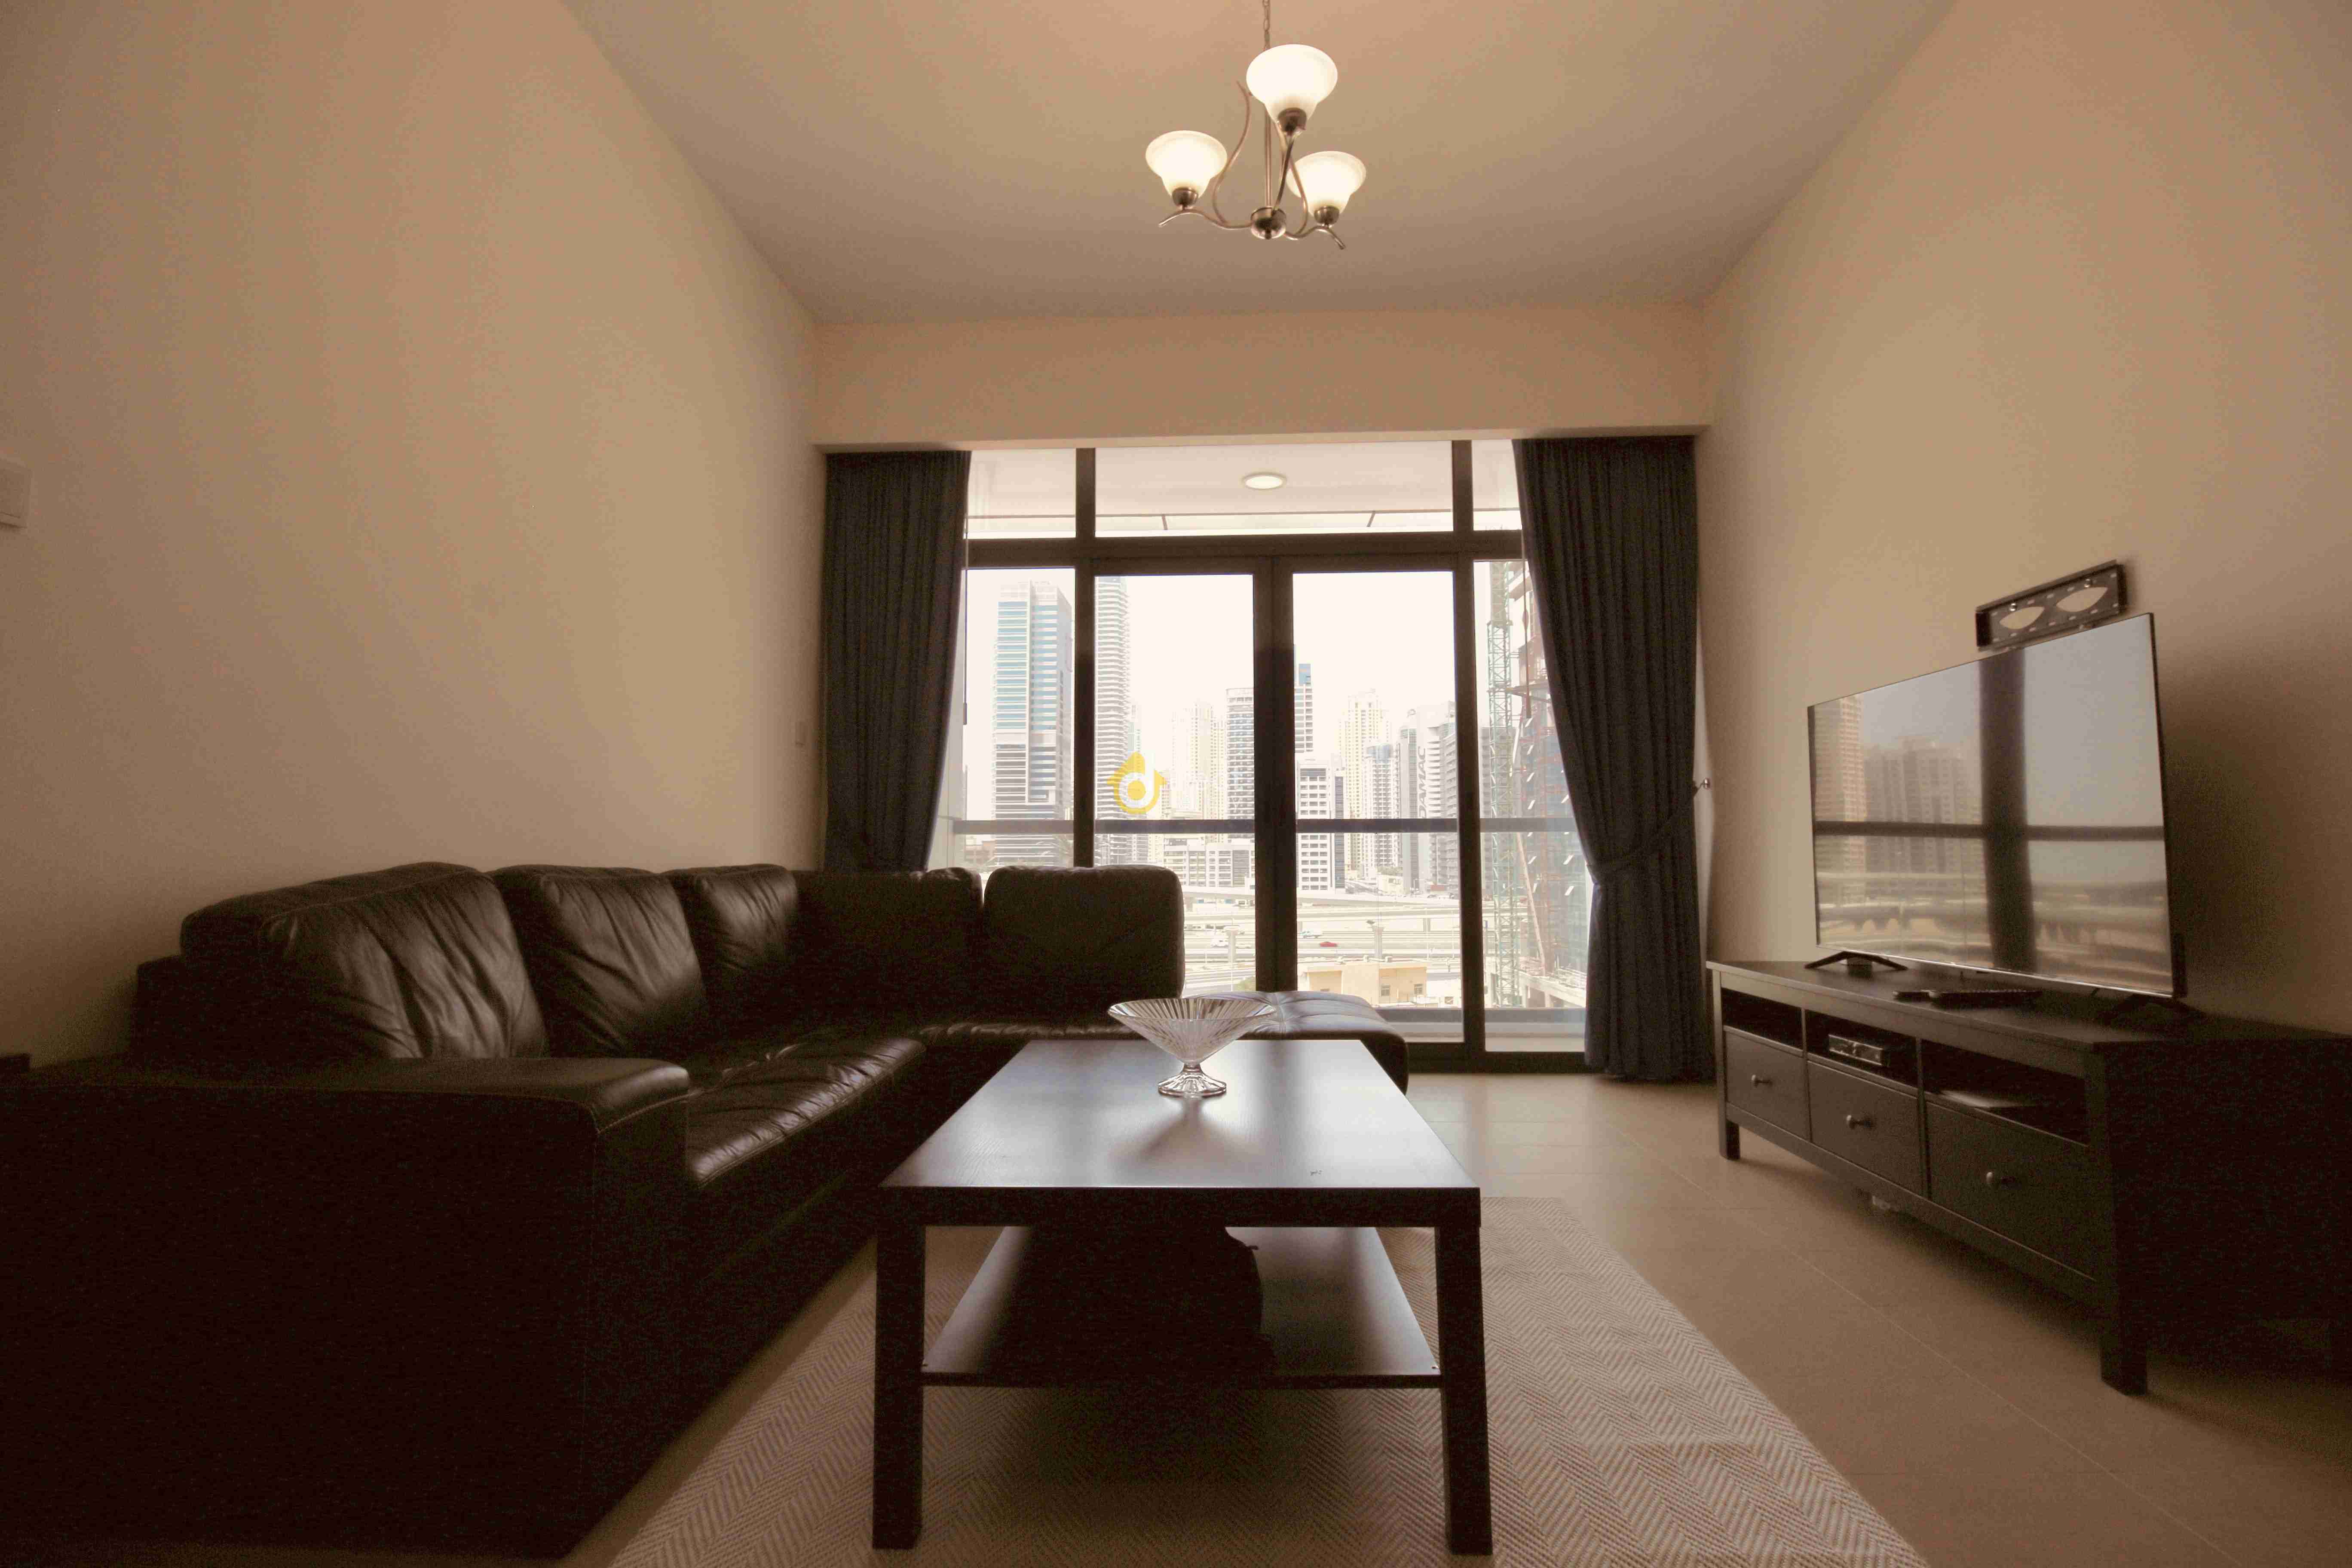 Apartment for rent on monthly basis in Lakeside Tower Cluster A!